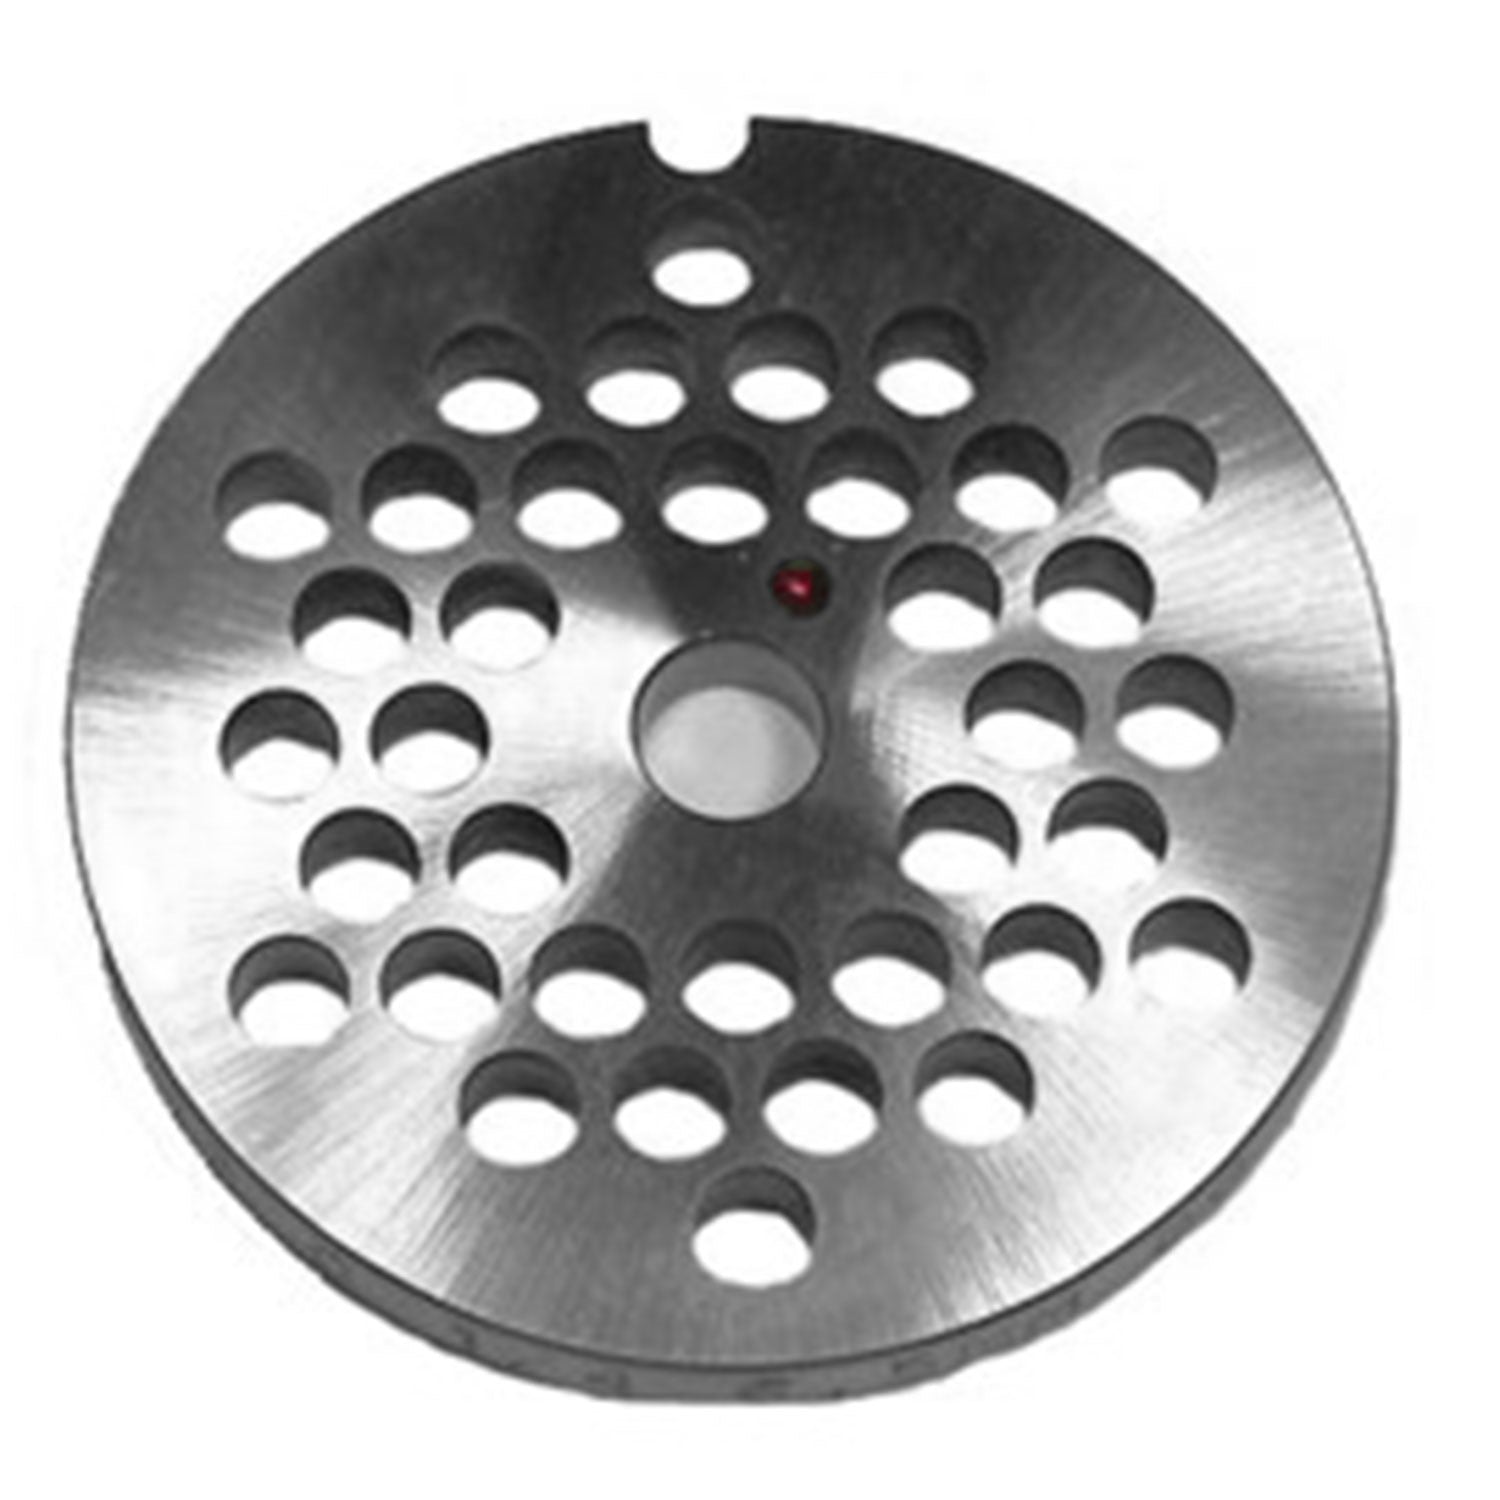 Size 12 DC Reversible Meat Grinder Plate, 1/4